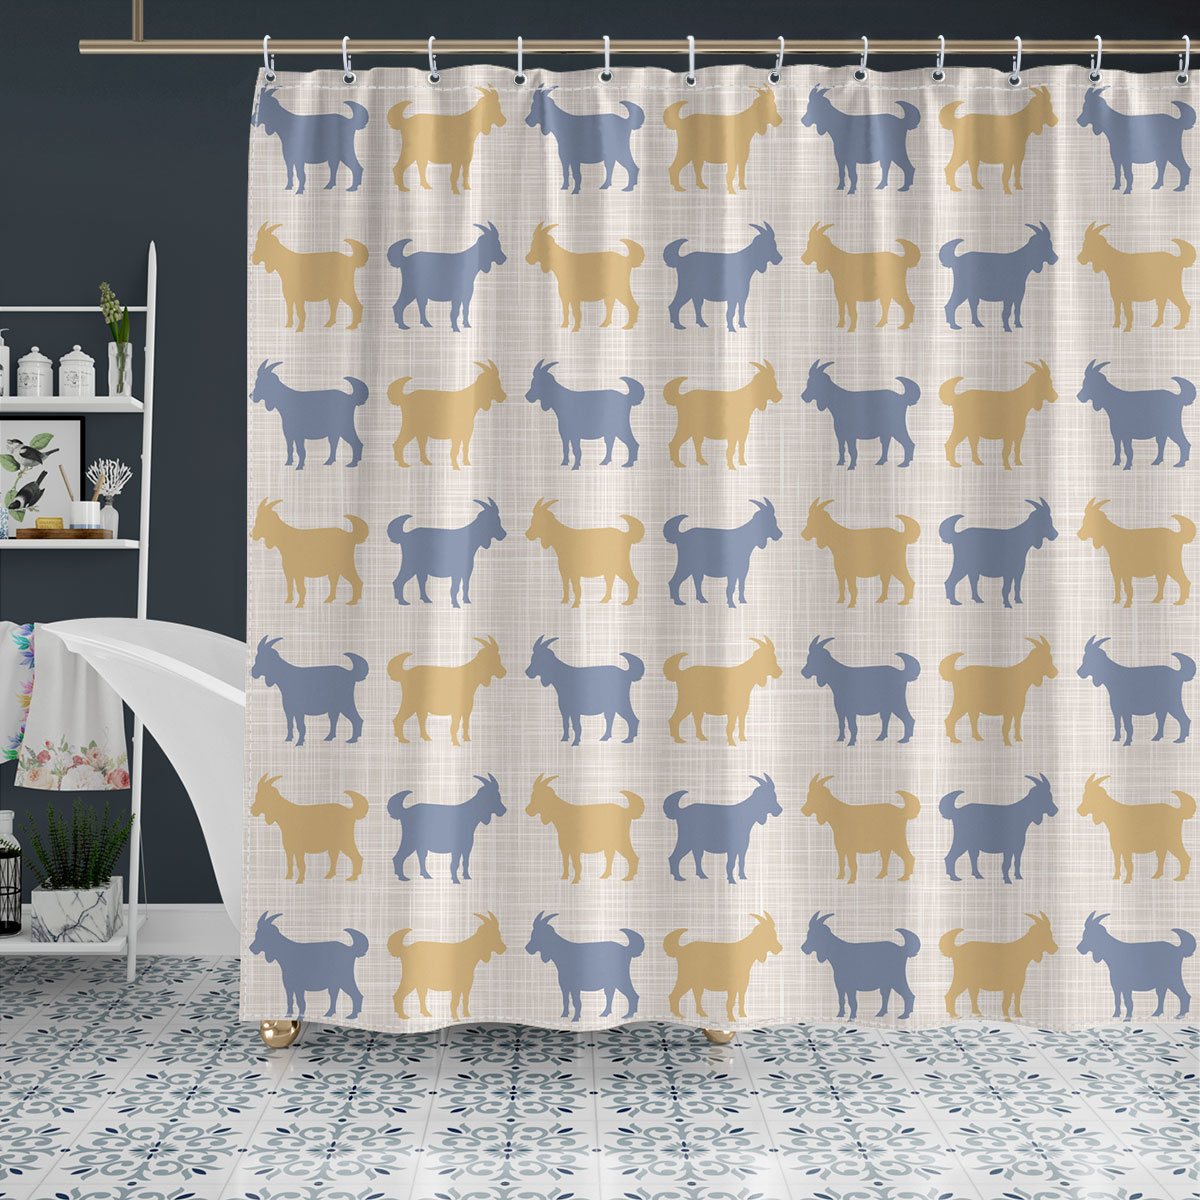 Goat Silhouette Pattern Shower Curtain